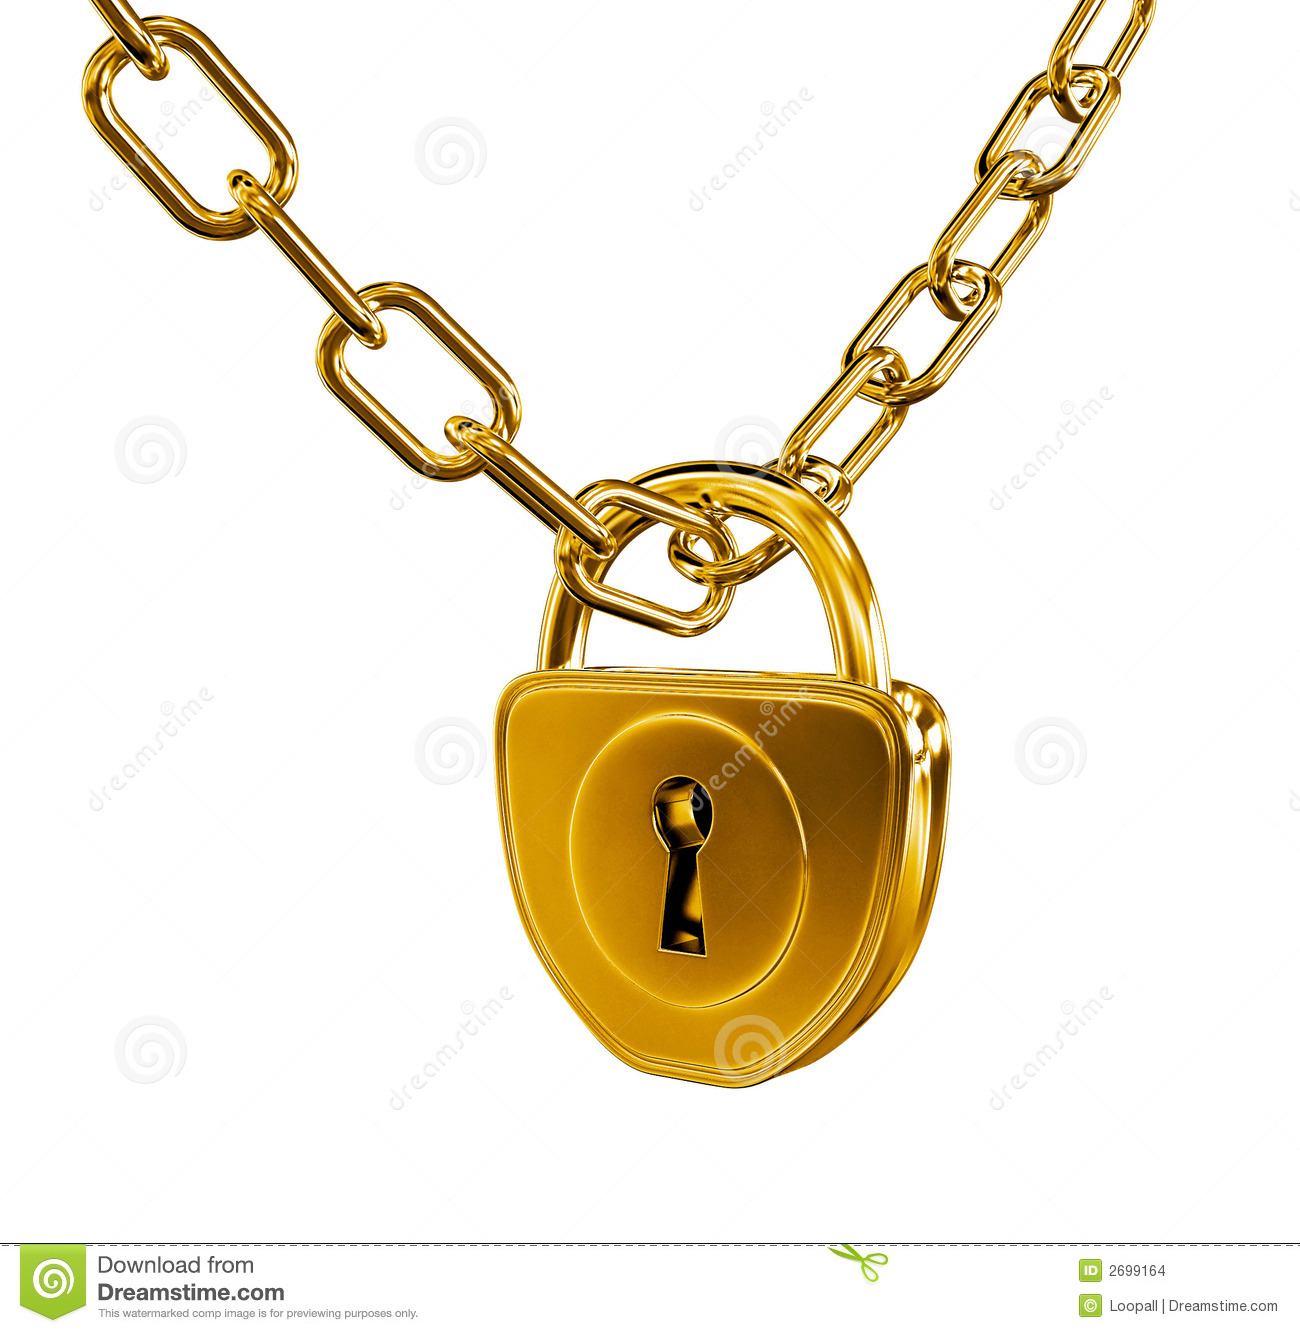 Gold Lock With Chain 3d Model Illustration Isolated With Clipping Path